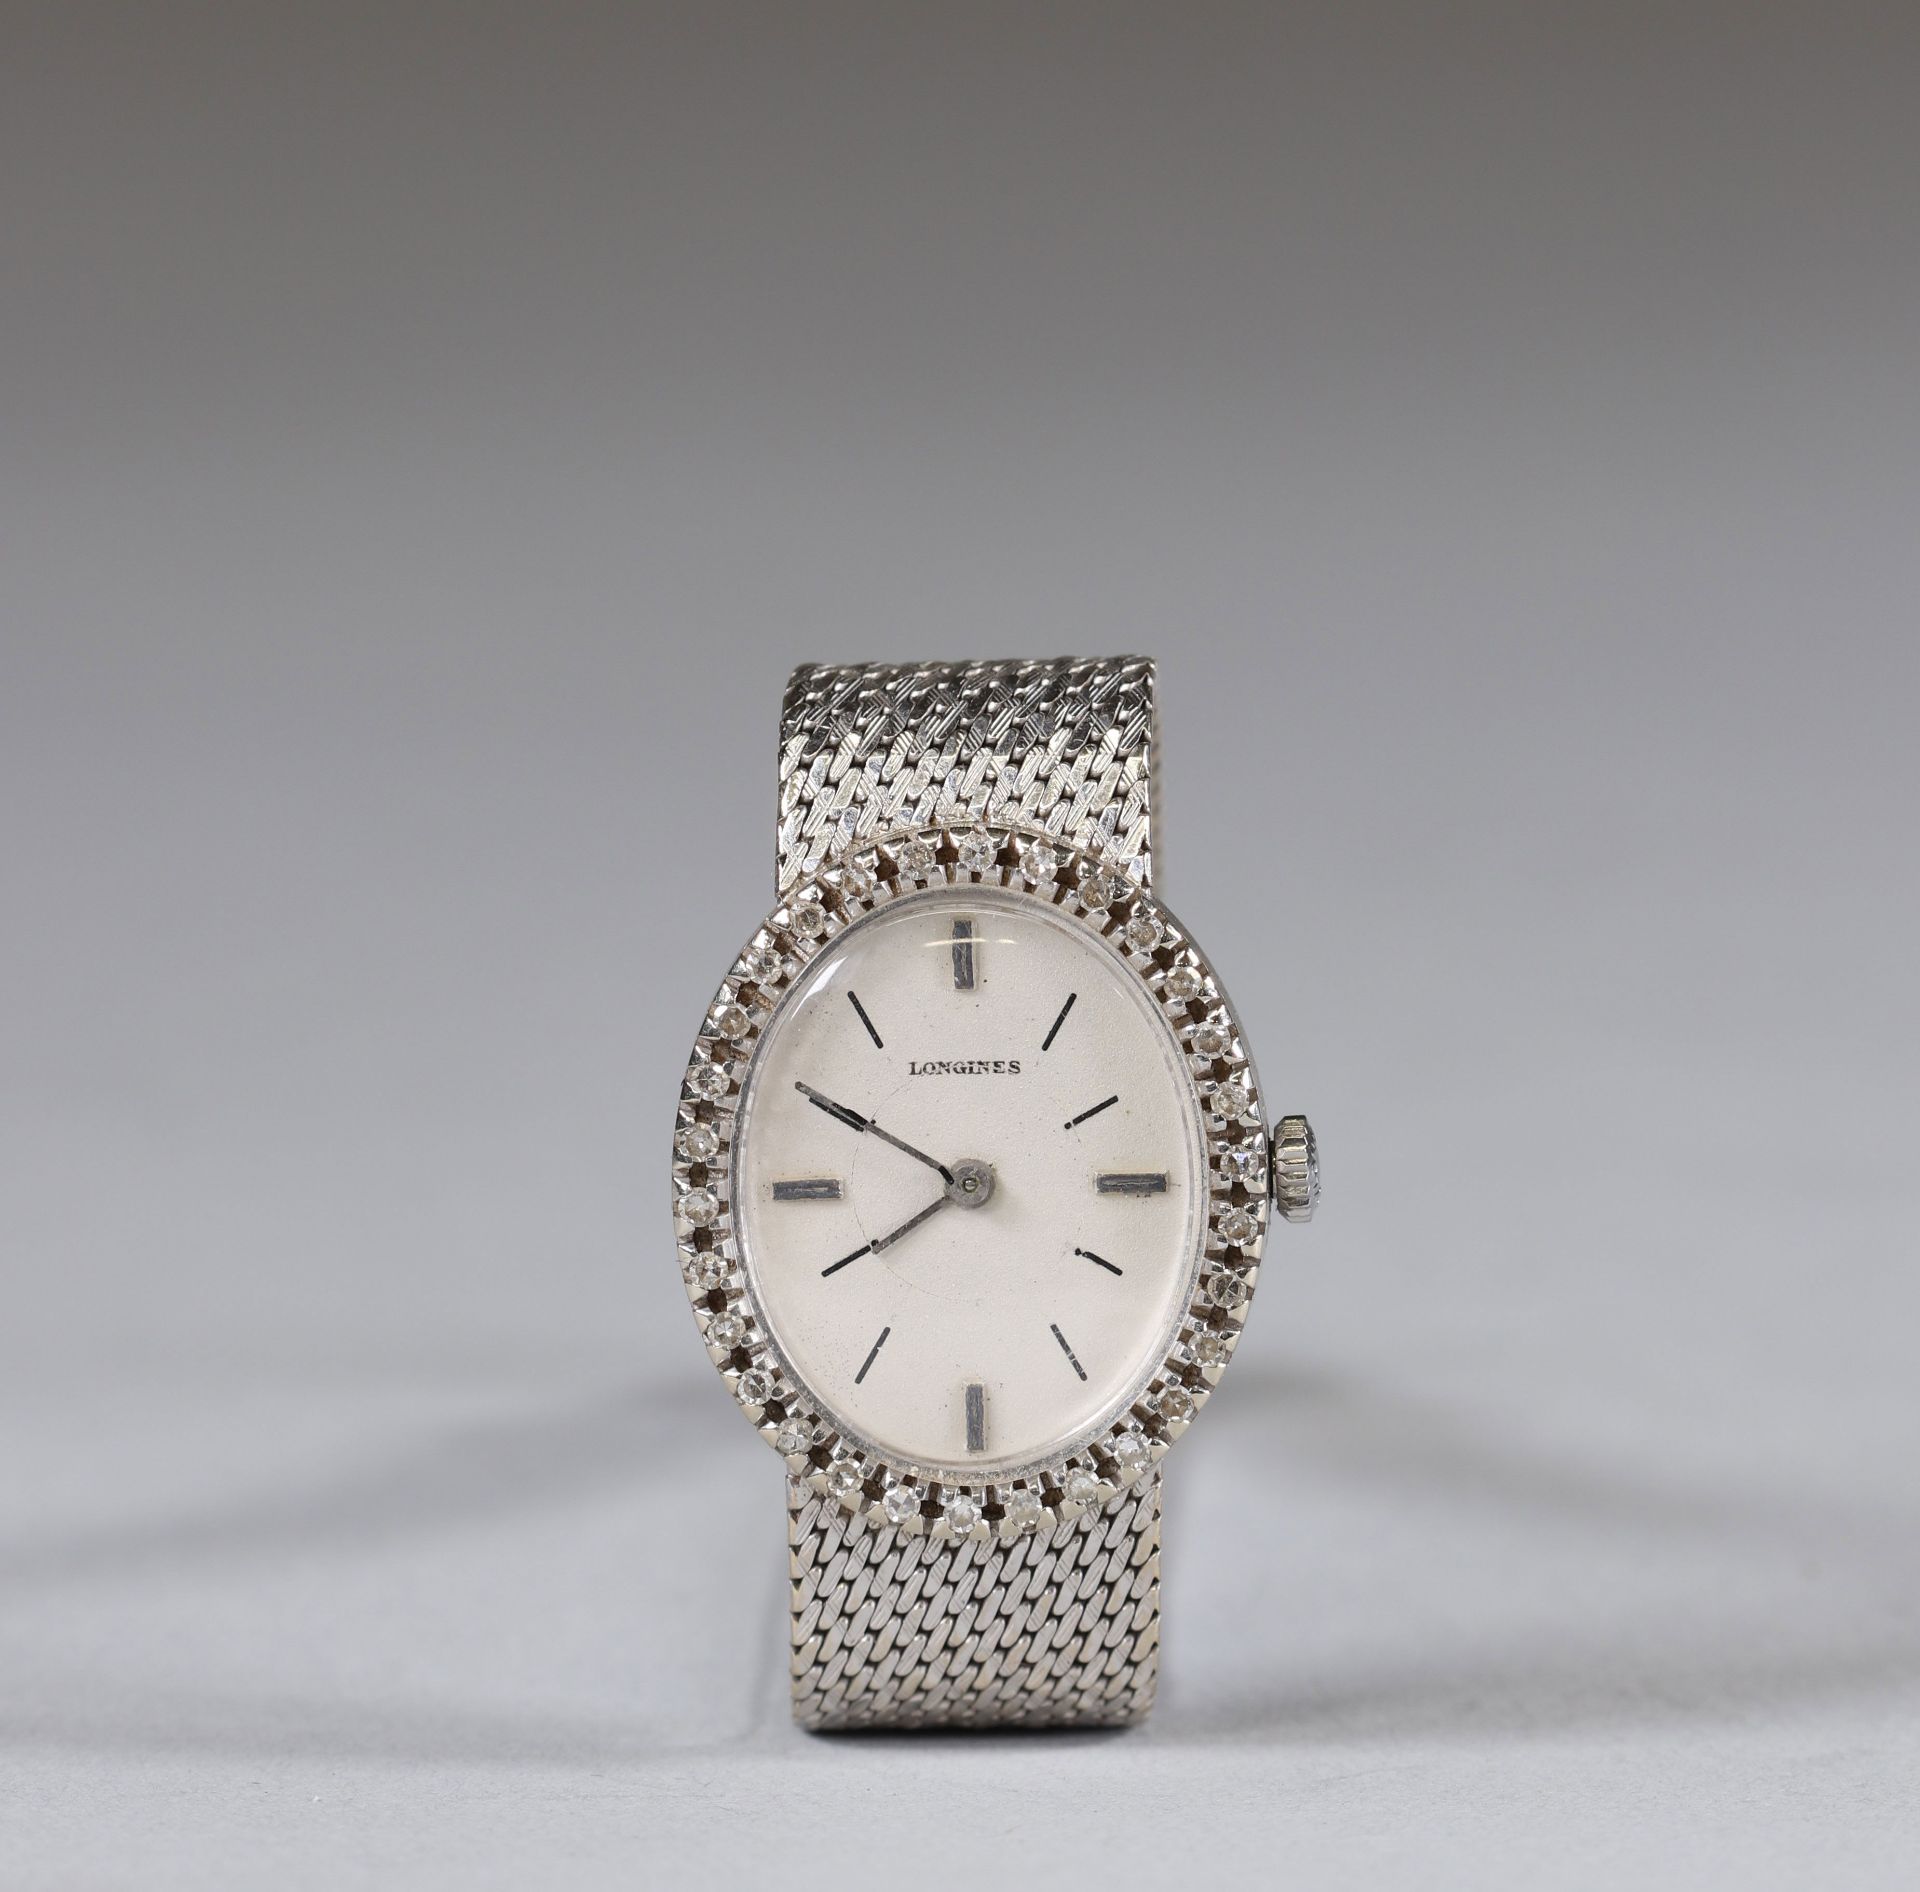 Longines watch in white gold (18k) and diamonds - Image 2 of 3